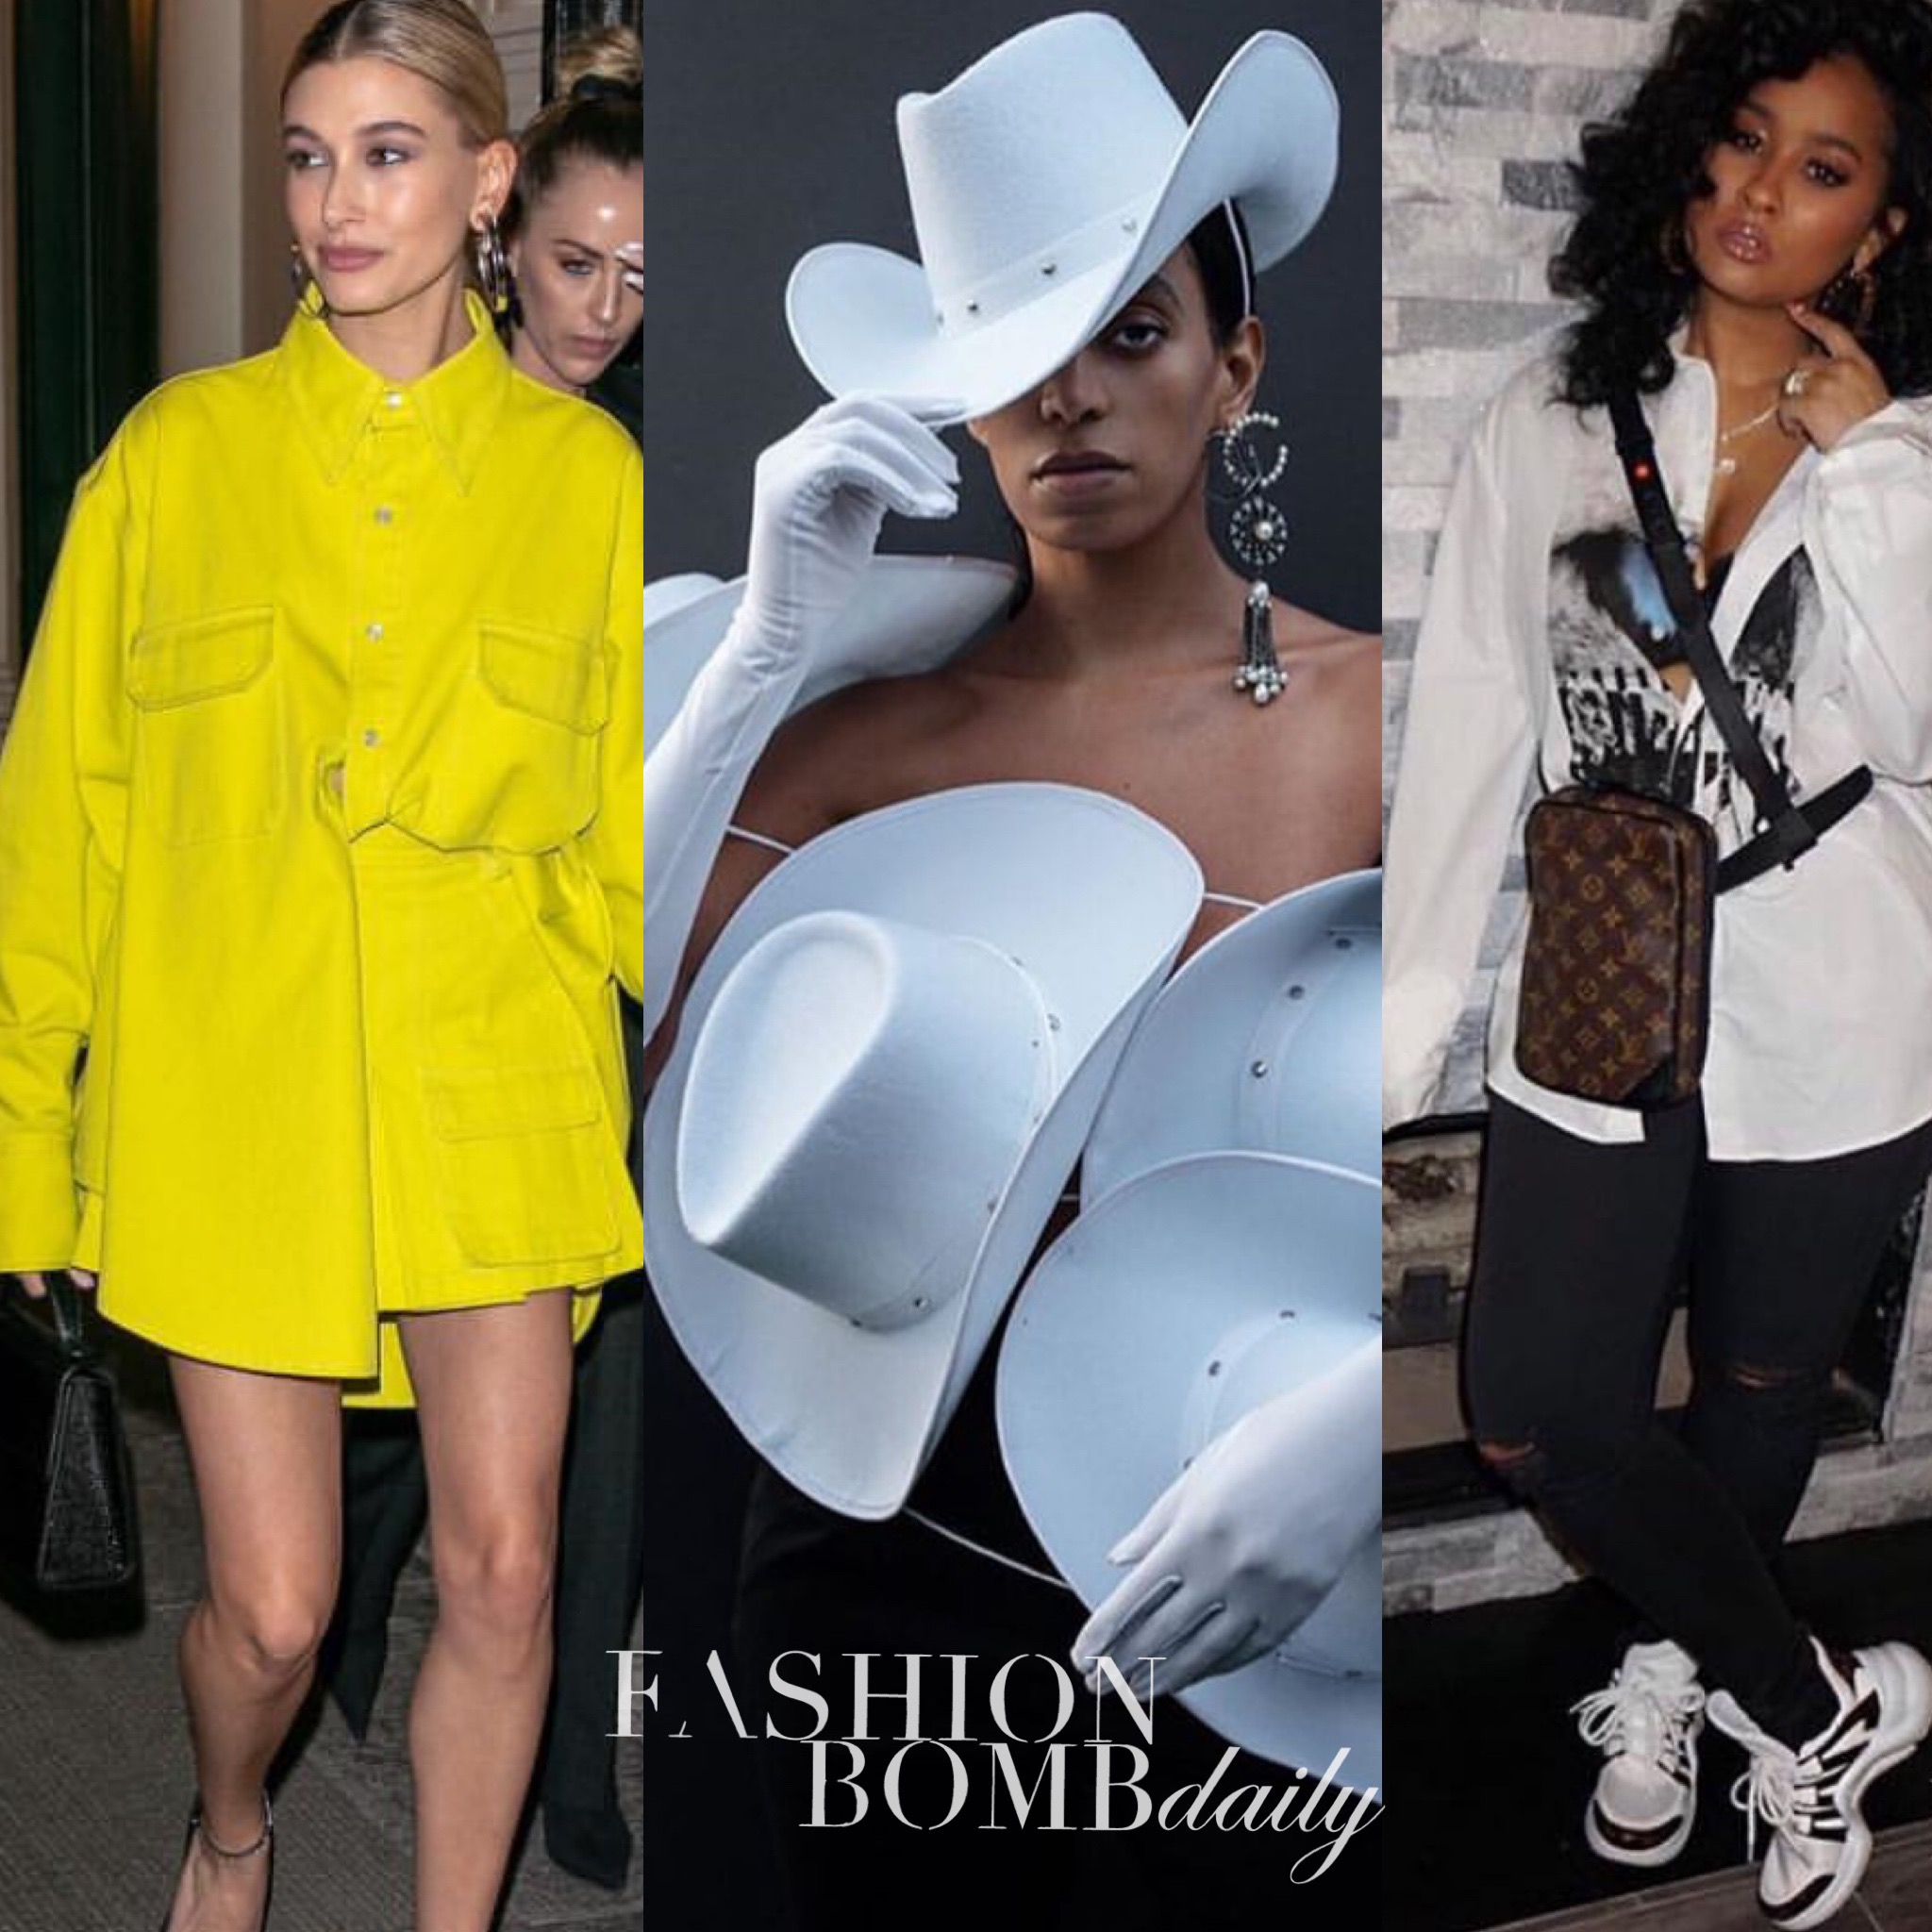 Top_6_Looks_of_the_Day_3:4:19_Hailey_Bieber_in_Matthew_Adams_Dolan_Solange_for_i-D,_Cardi_B_in_Balenciaga_and_more